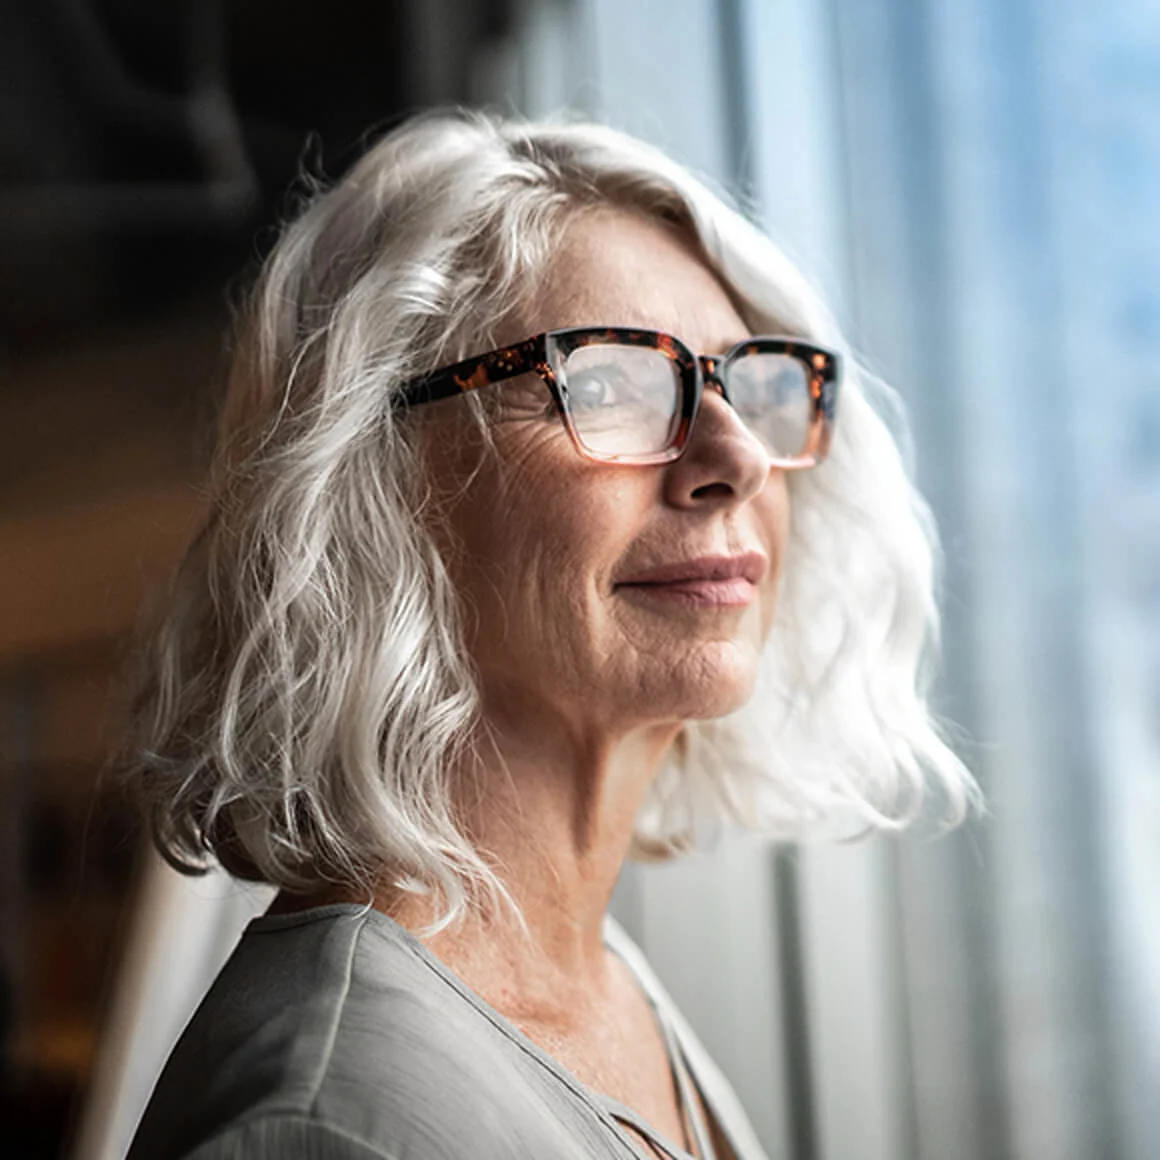 Woman with glasses standing next to window